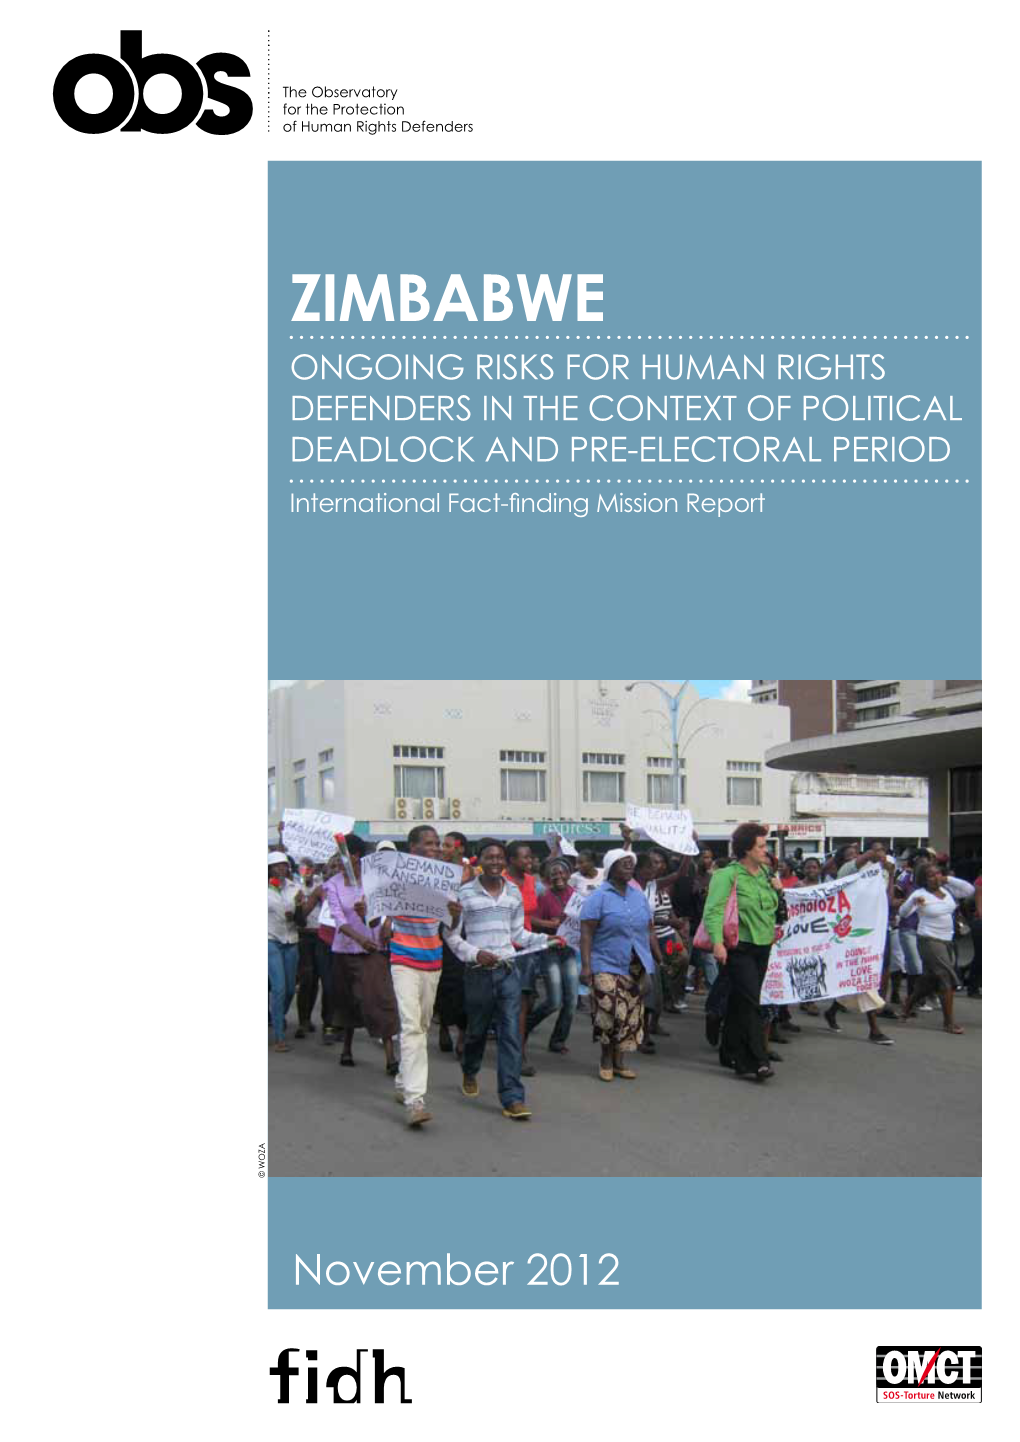 ZIMBABWE Ongoing Risks for Human Rights Defenders in the Context of Political Deadlock and Pre-Electoral Period International Fact-Finding Mission Report a © WOZ ©